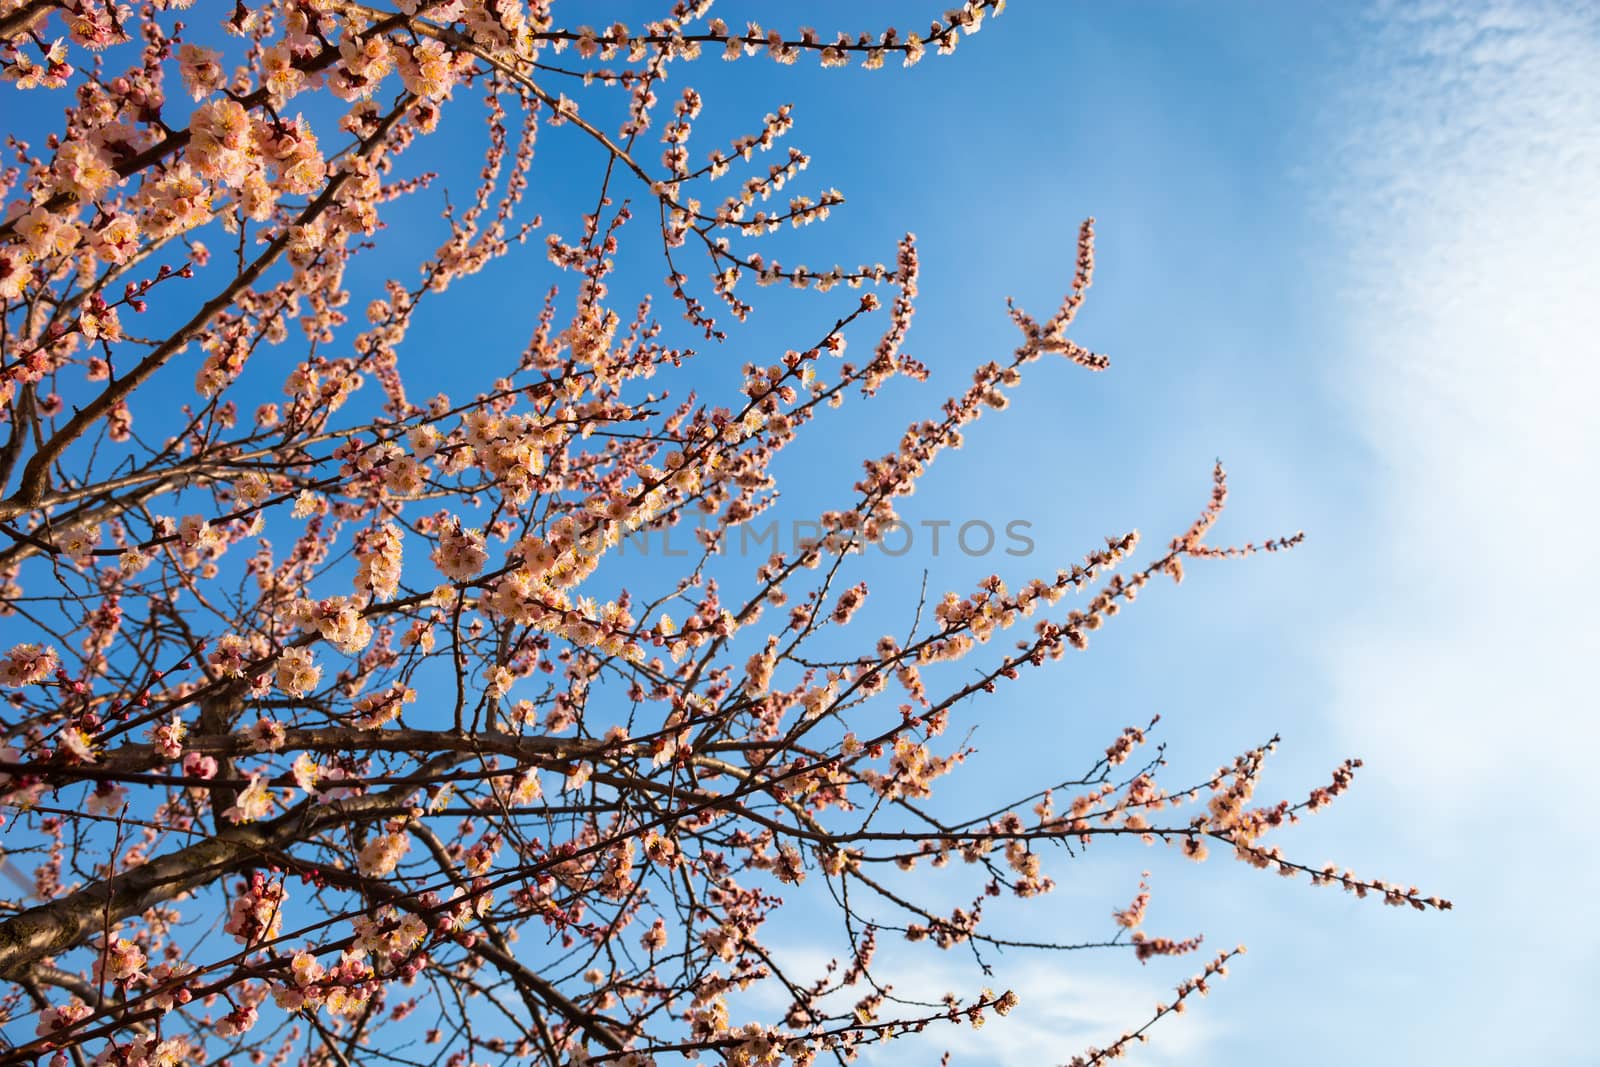 Apricot blossom branches against the sky with cirrus clouds.